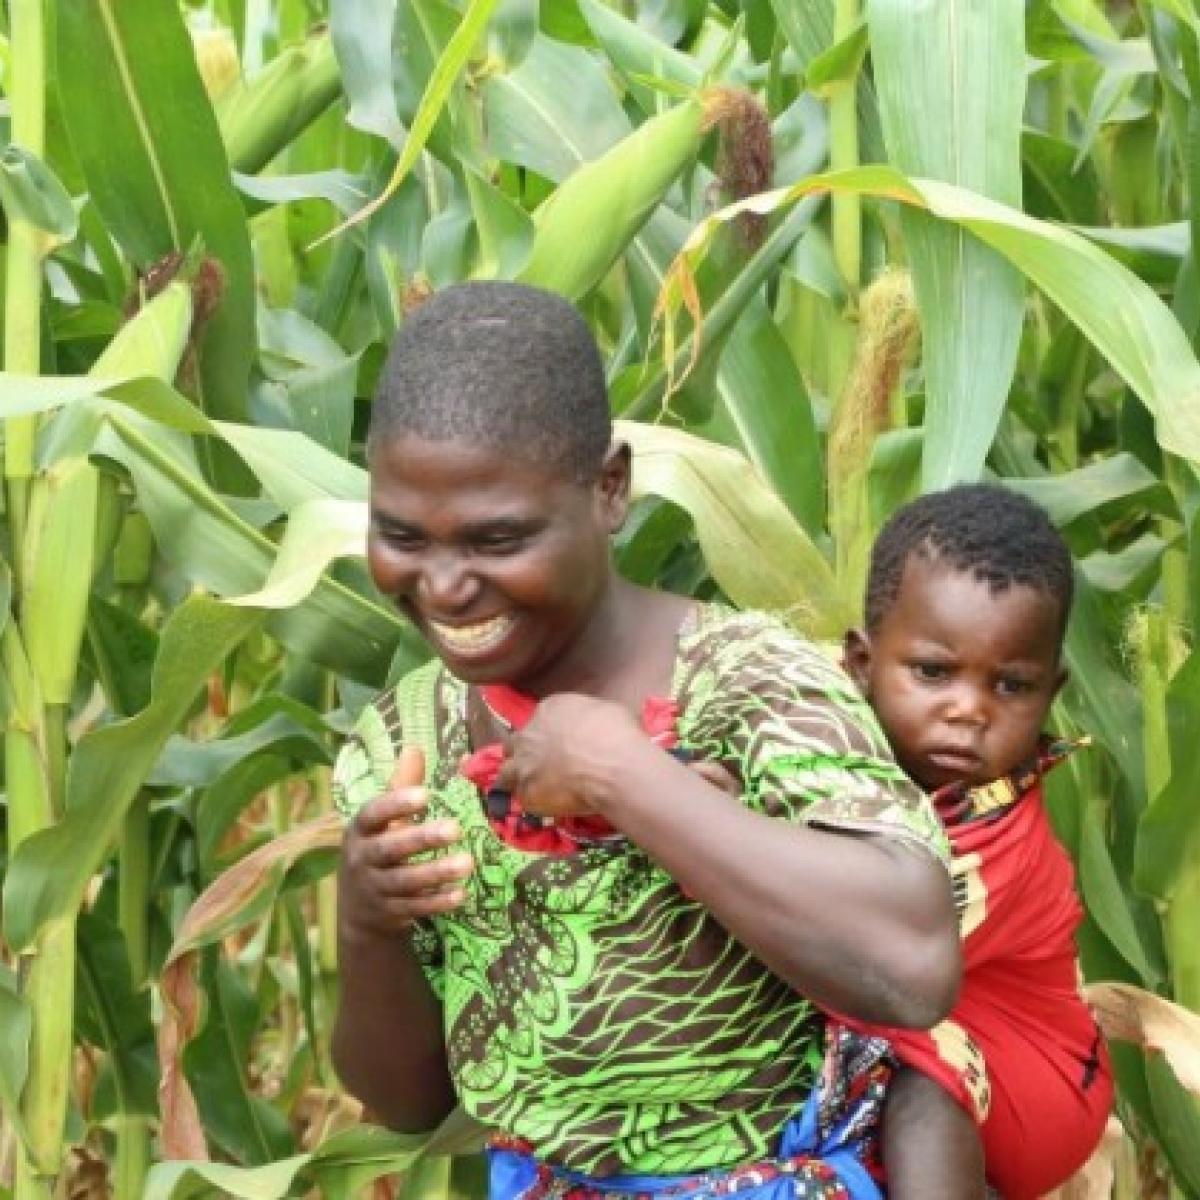 Through USAID’s Africa RISING program, farmers in Malawi, like Mercy Joseph (pictured), learn agroforestry practices to improve food security while increasing soil fertility, tree canopy, and wildlife habitat.